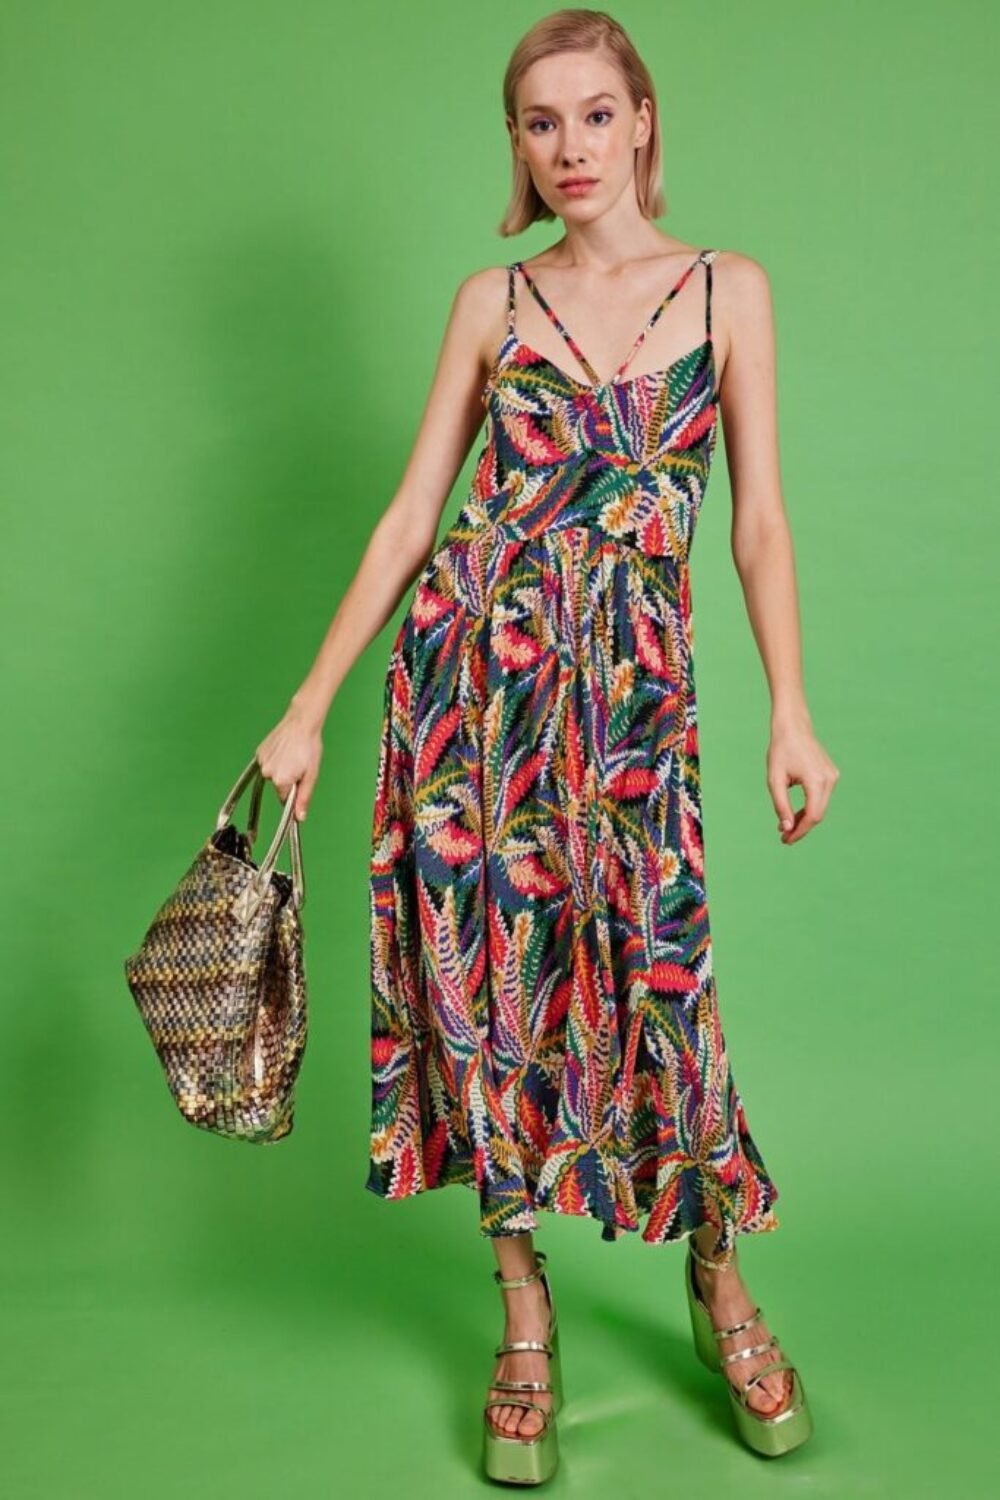 Shop Lux Linen Blend Floral Shift Dress and women's luxury and designer clothes at www.lux-apparel.co.uk